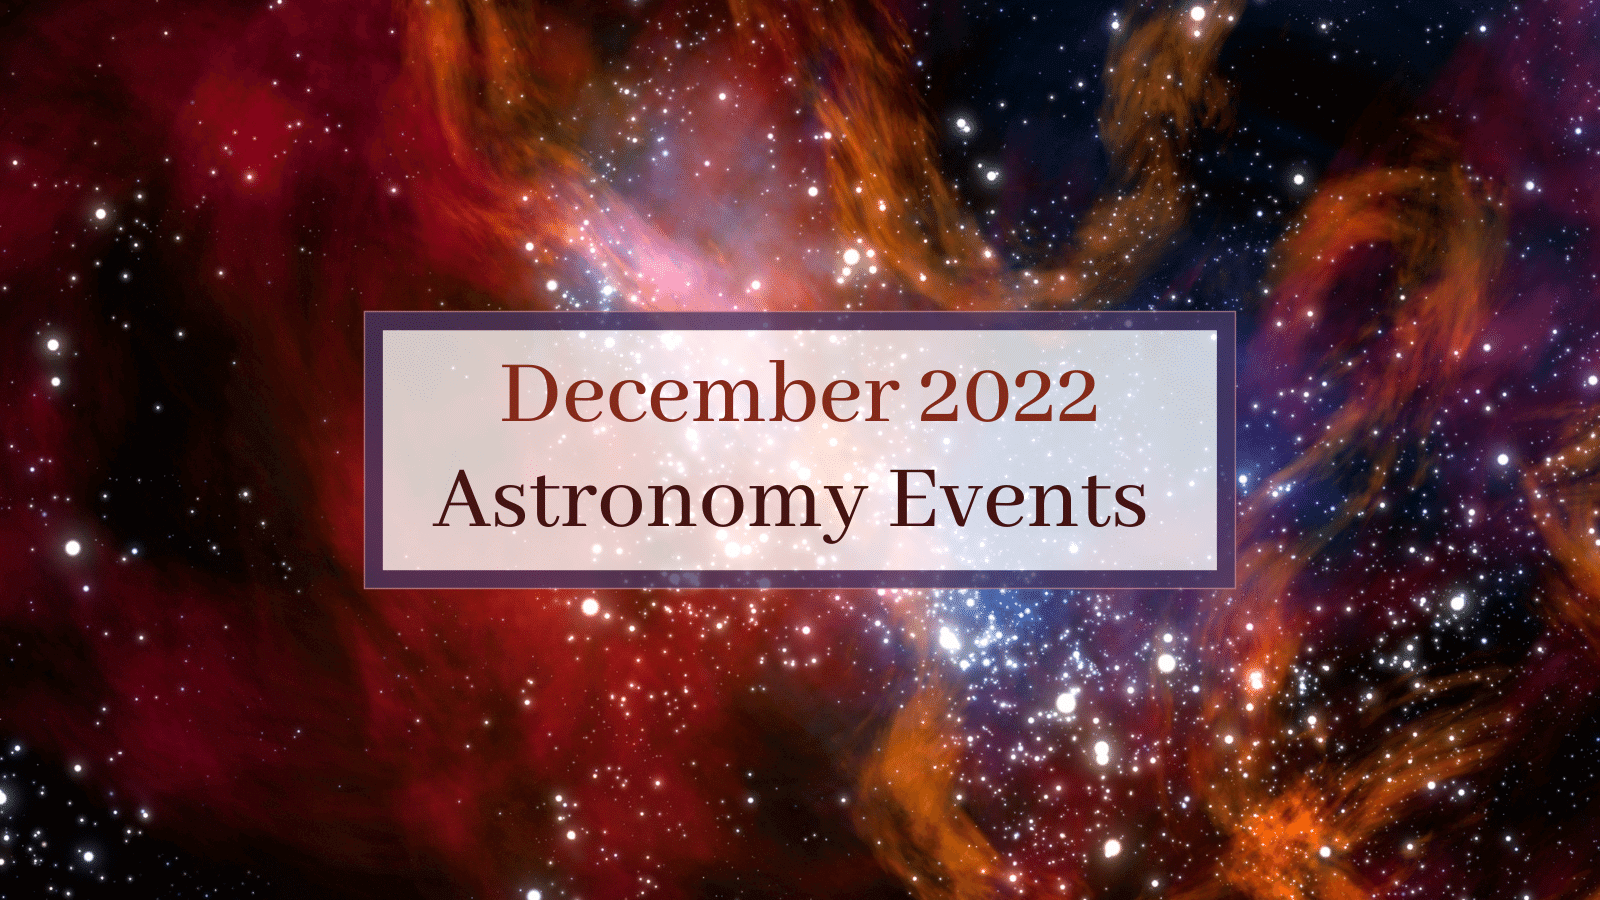 December 2022 Astronomy Events